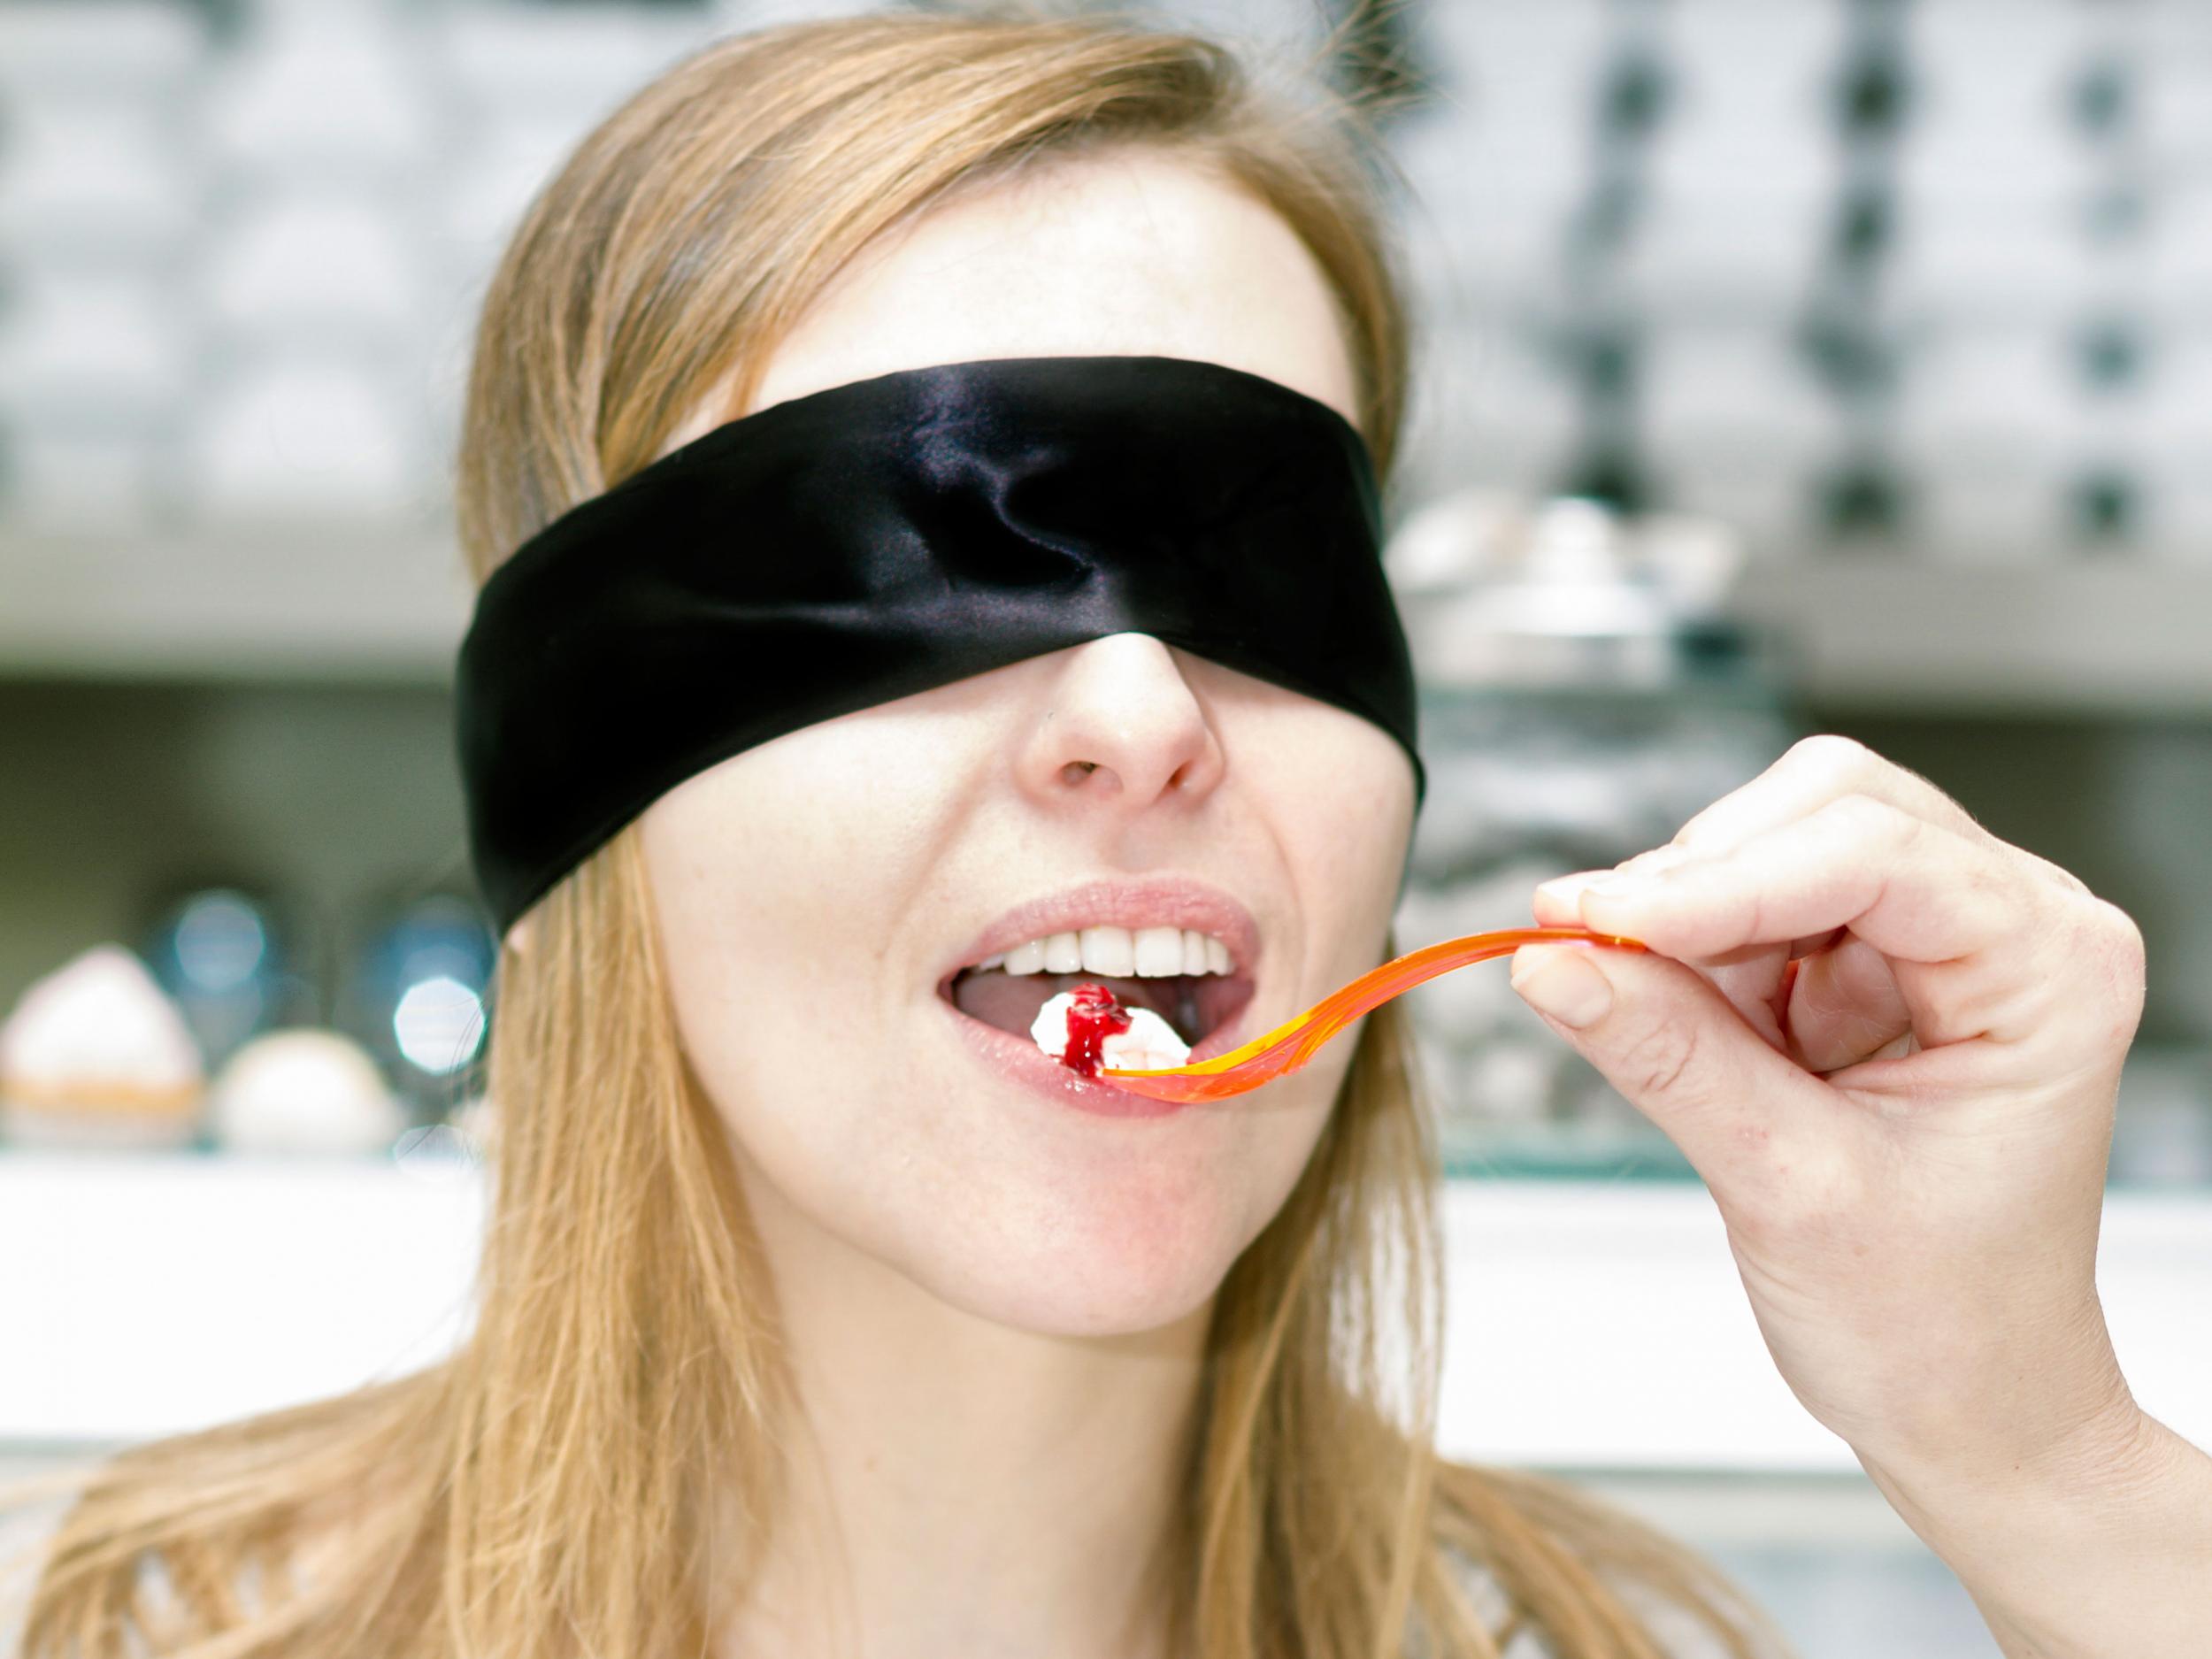 What It's Like to Eat Blindfolded